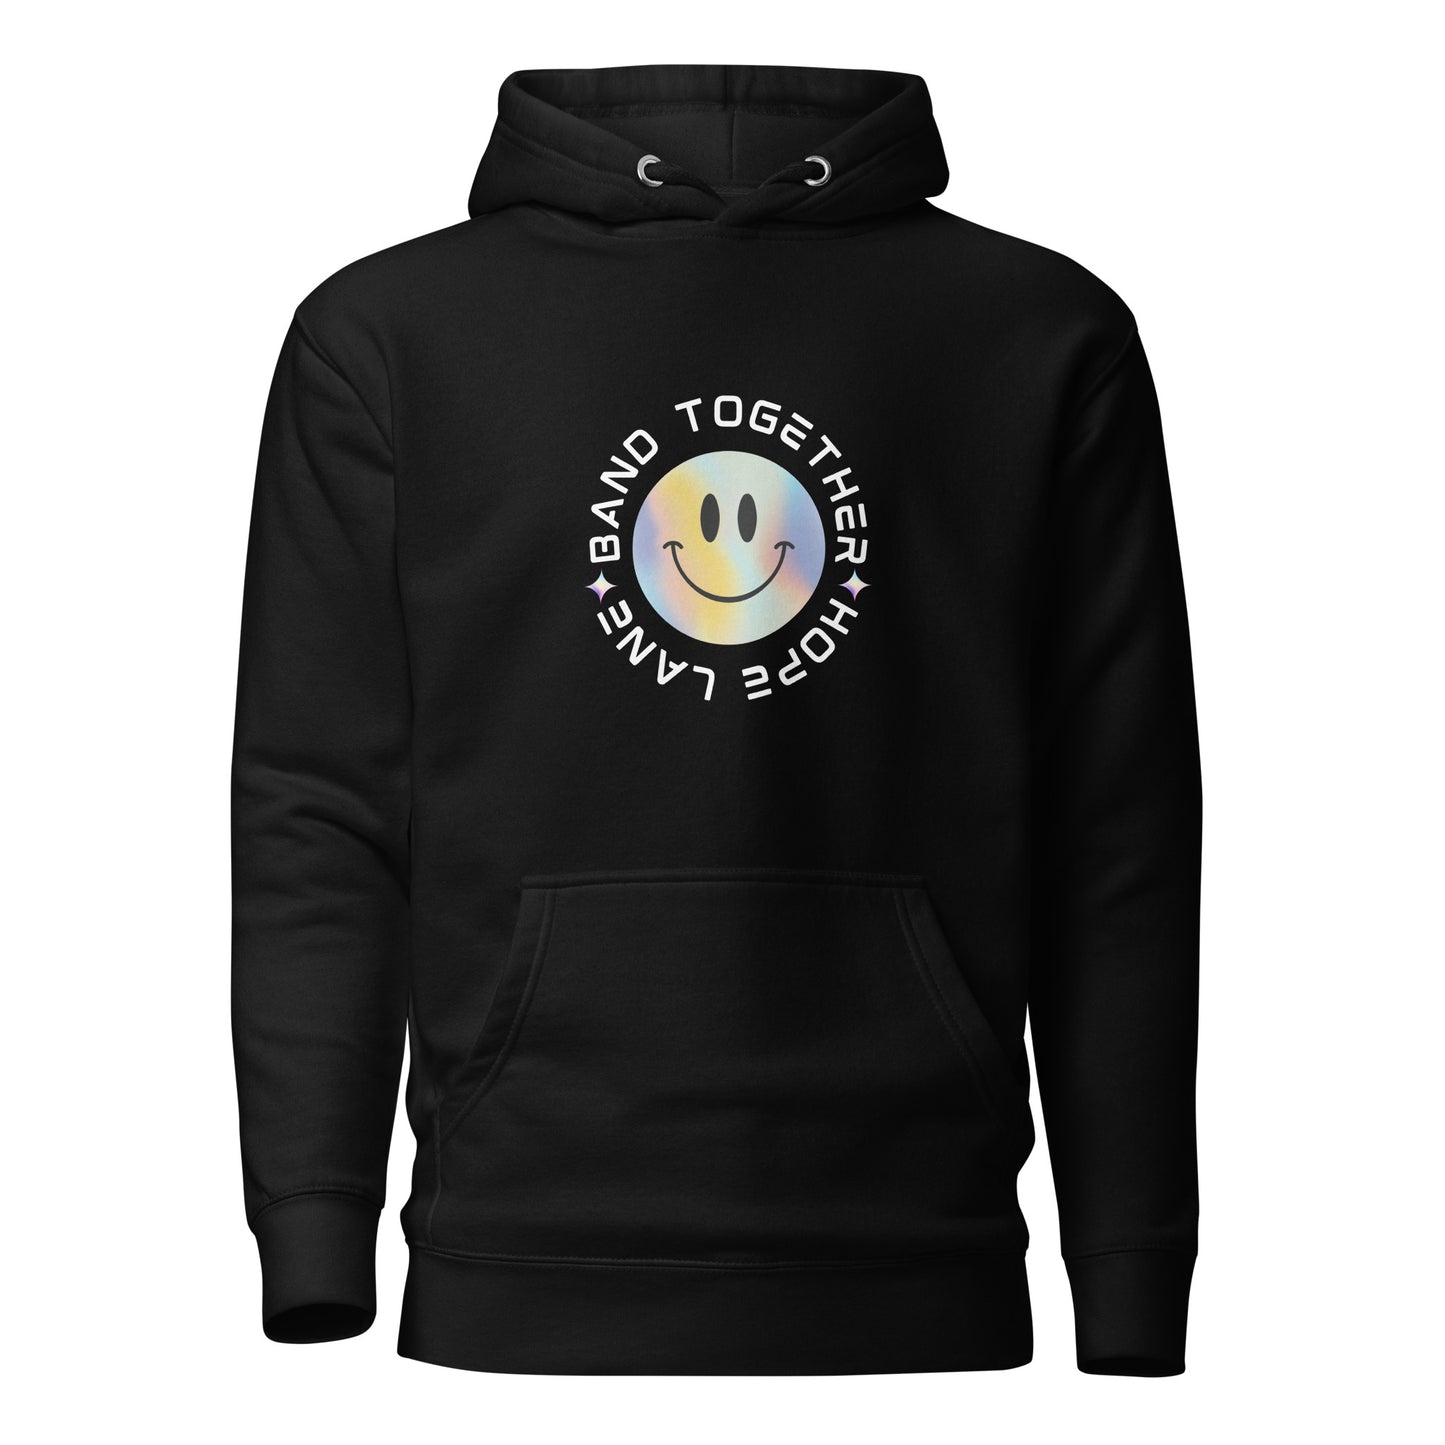 Band Together Unisex Hoodie (official Hope Lane merch)